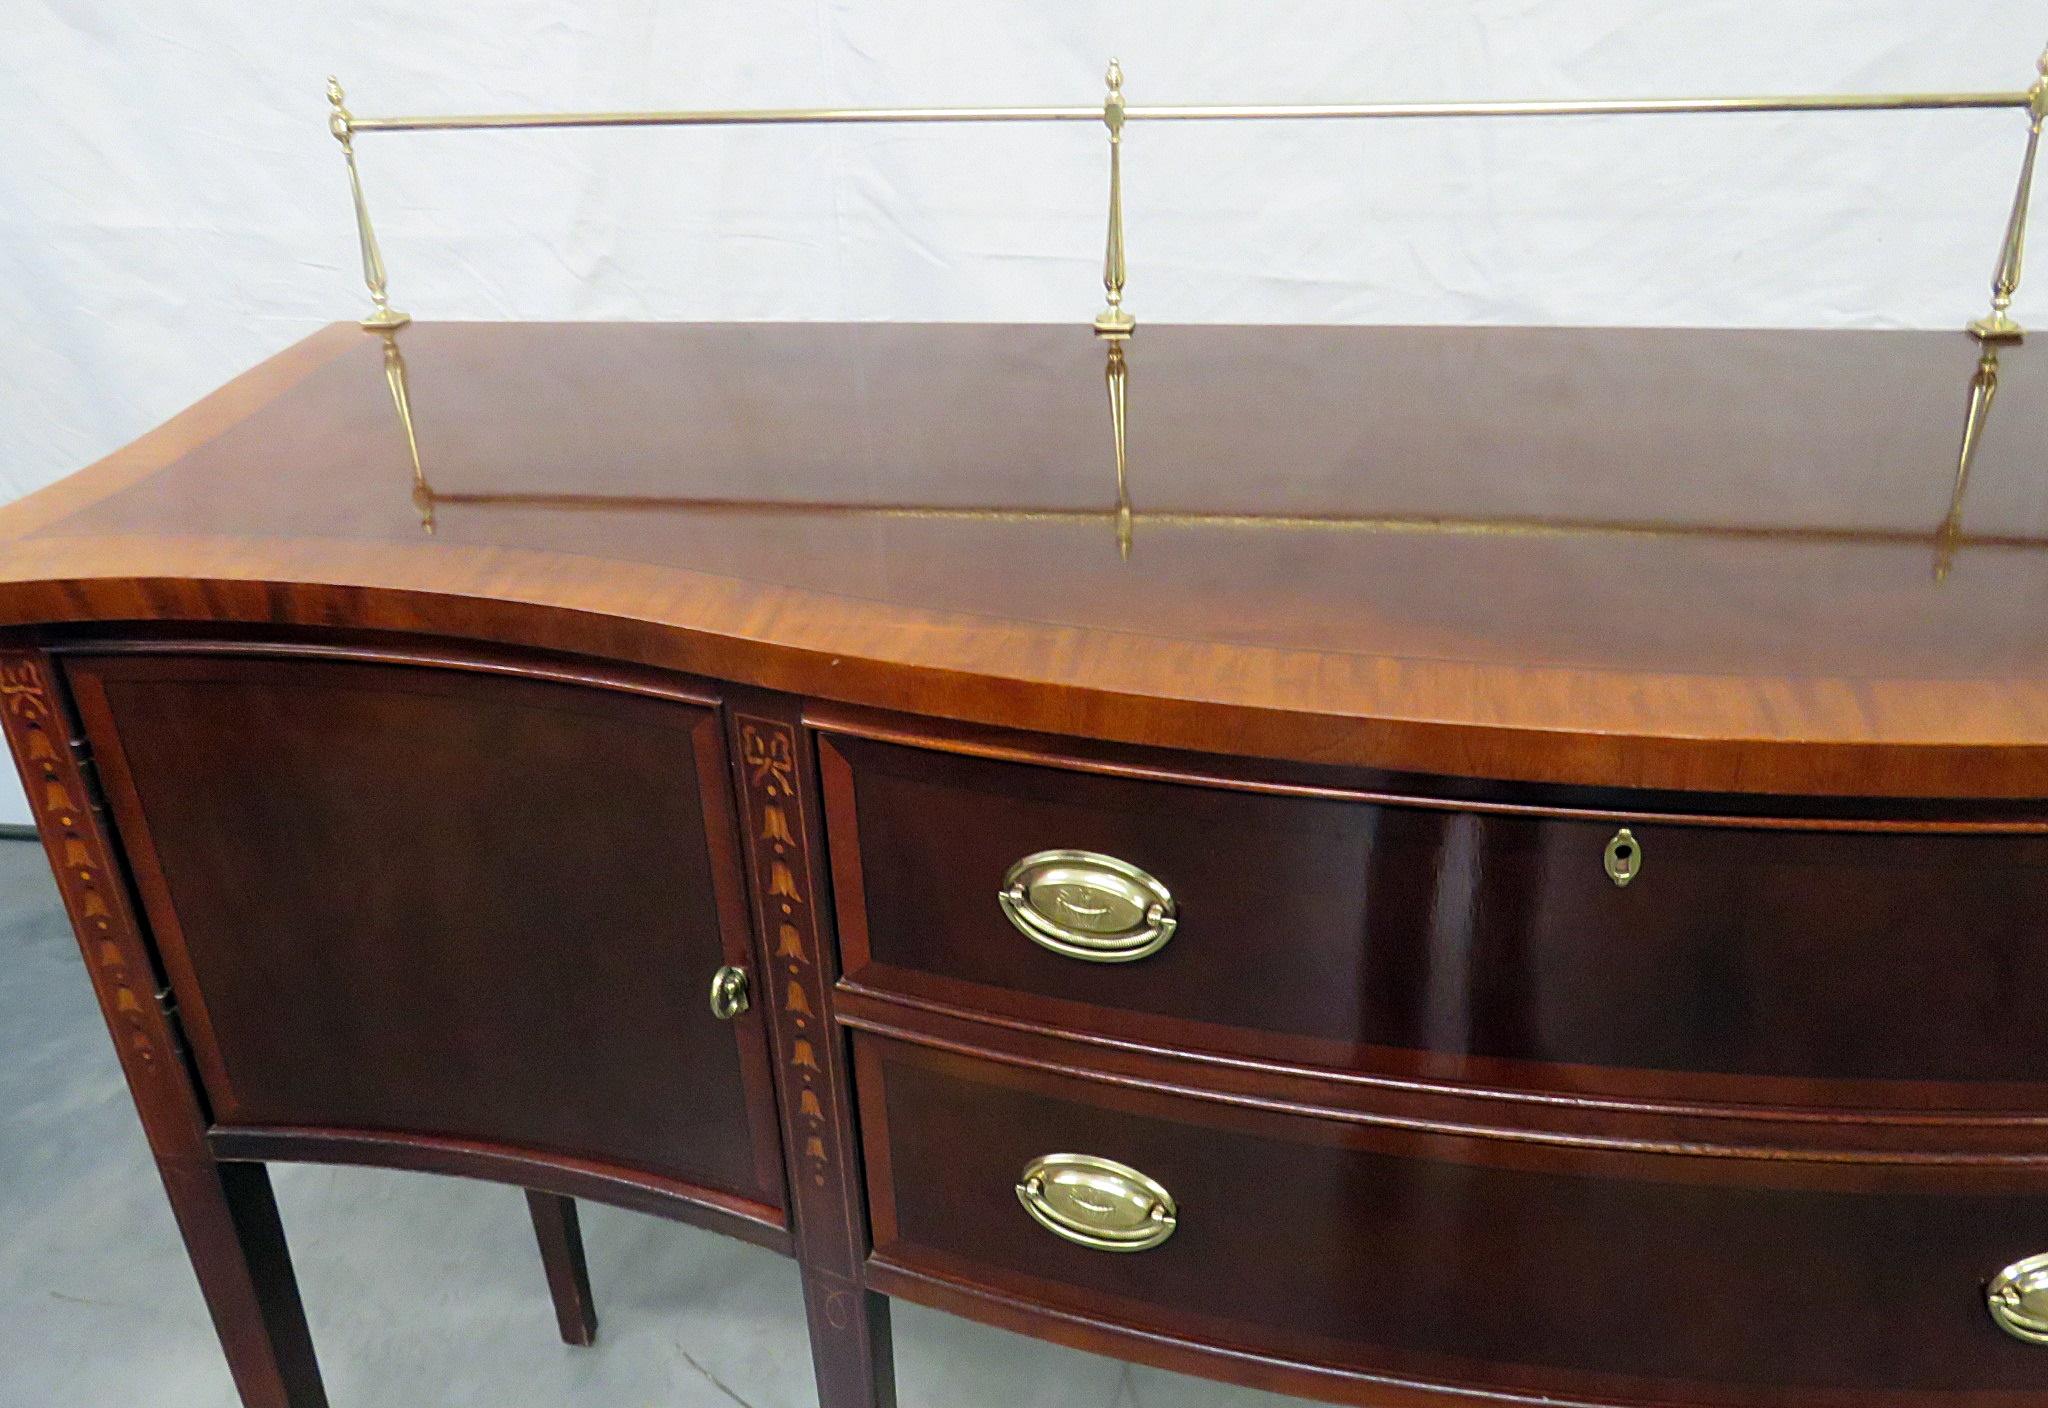 Ethan Allen inlaid Federal style sideboard with 2 doors, 2 drawers, and a brass gallery.